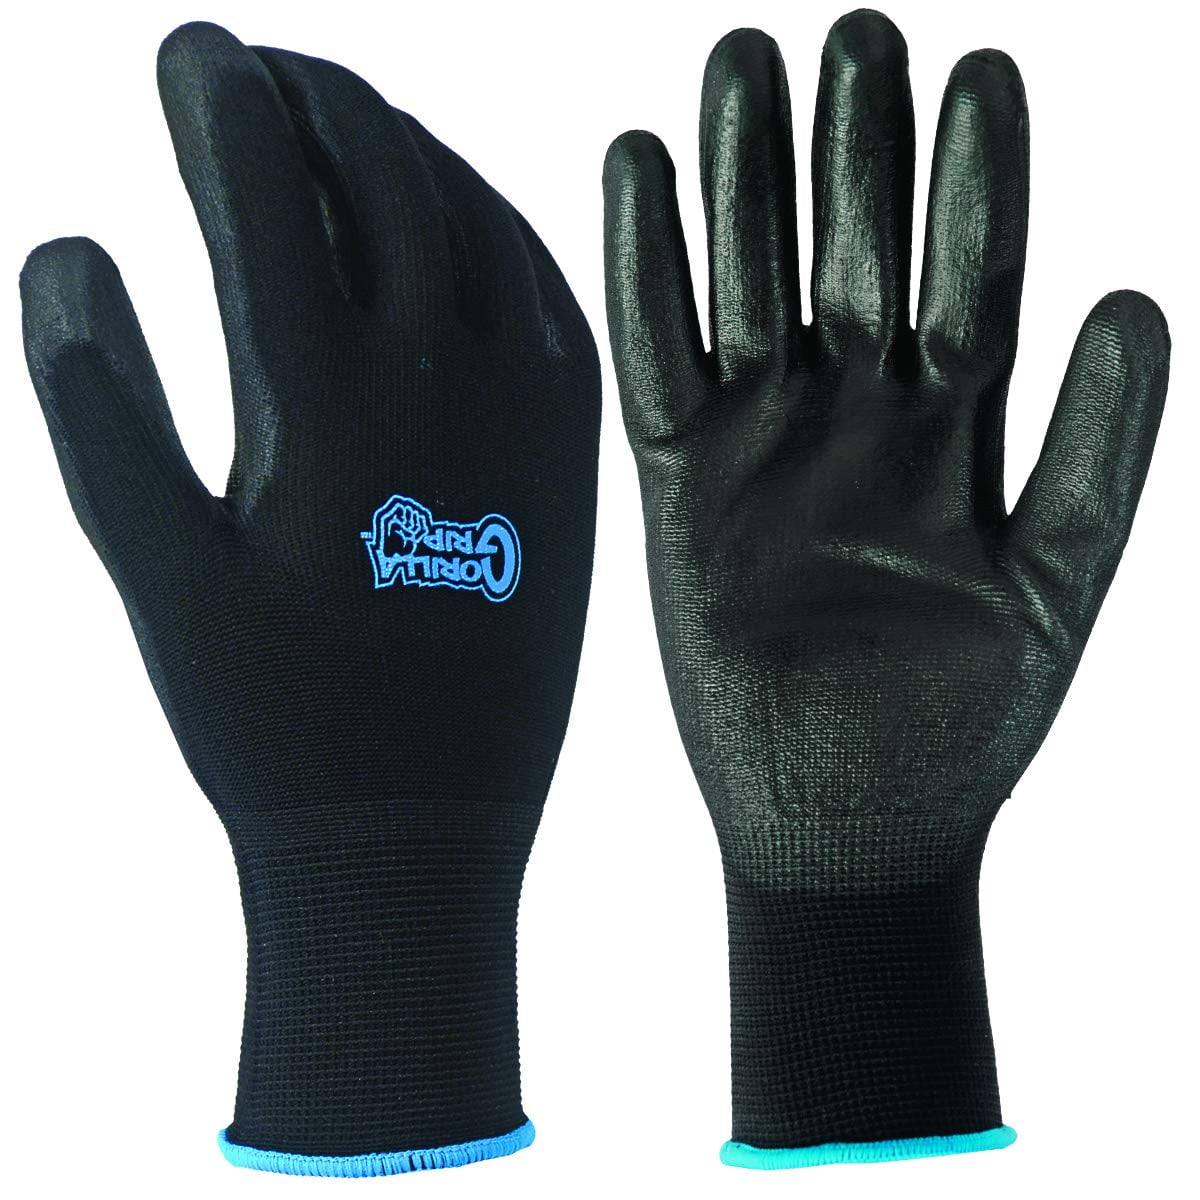 Gorilla Grip All-Purpose Work Gloves plunge to $3.50 Prime shipped